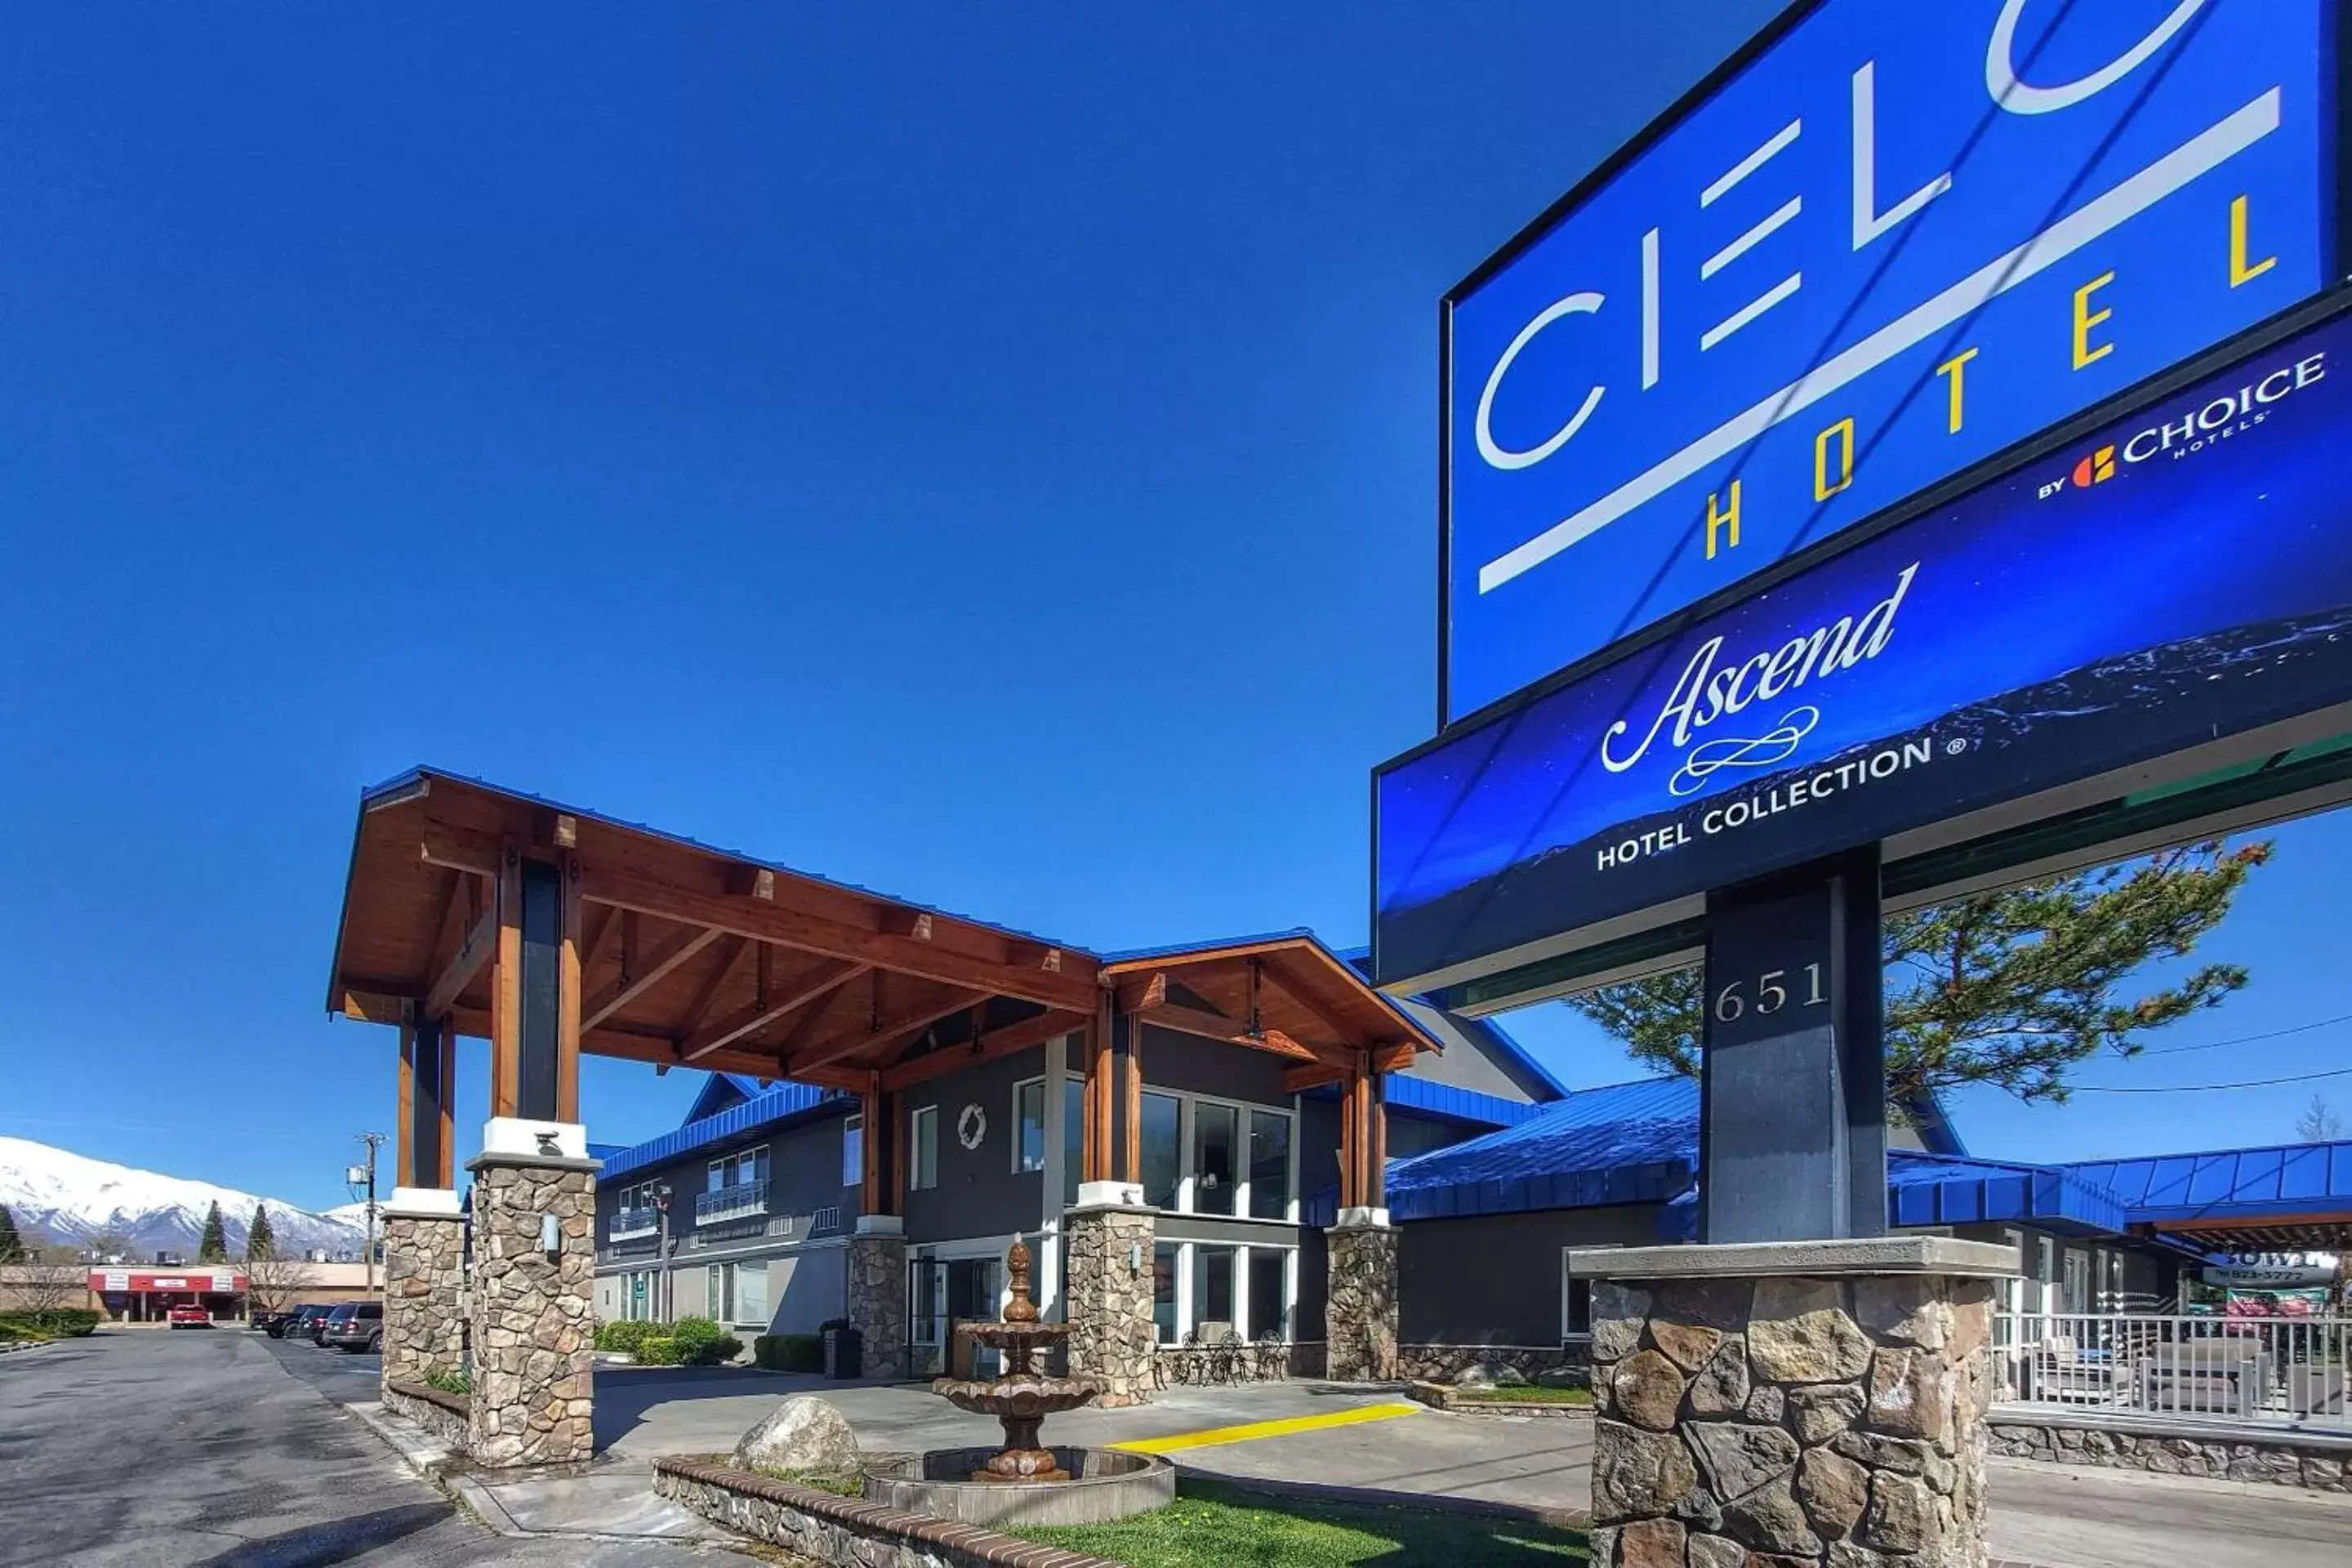 Property building in Cielo Hotel Bishop-Mammoth, Ascend Hotel Collection